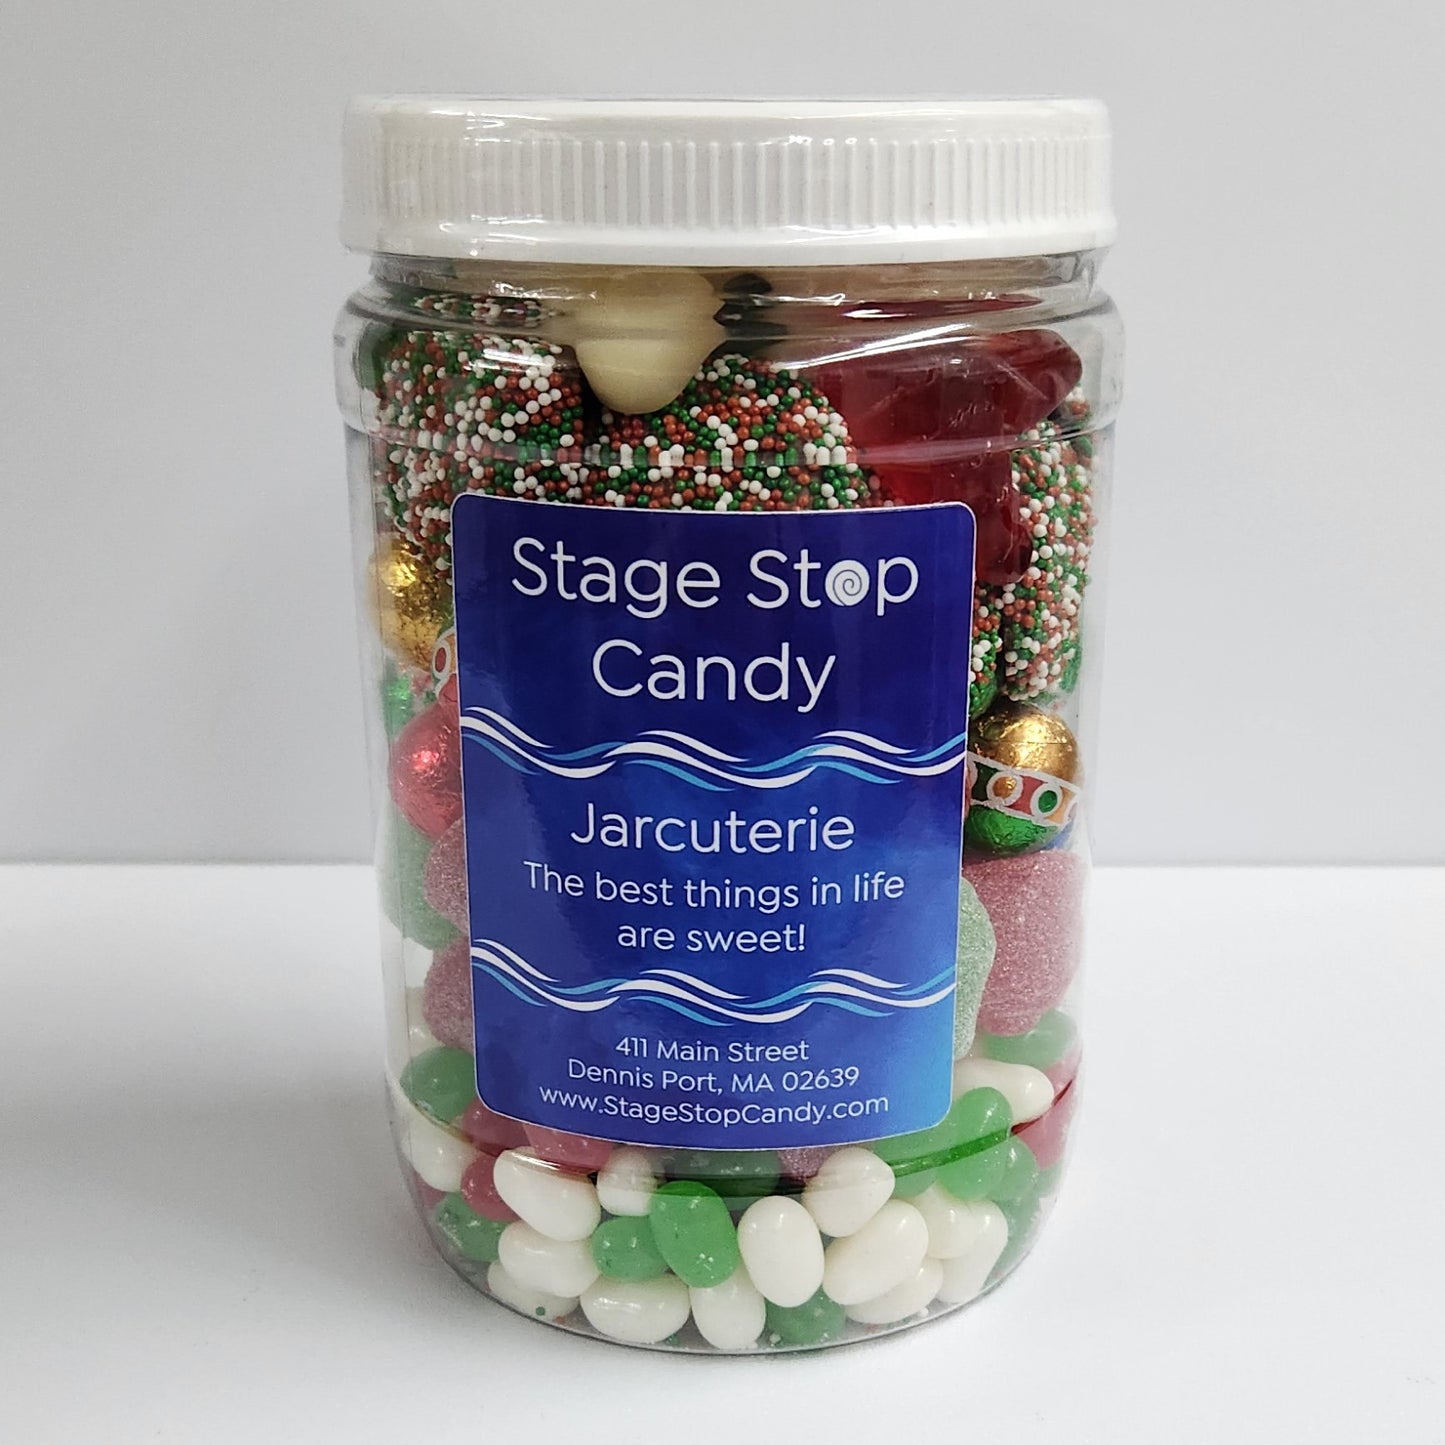 Stage Stop Candy's Jarcuterie makes the perfect gift for friends and family, or yourself. 